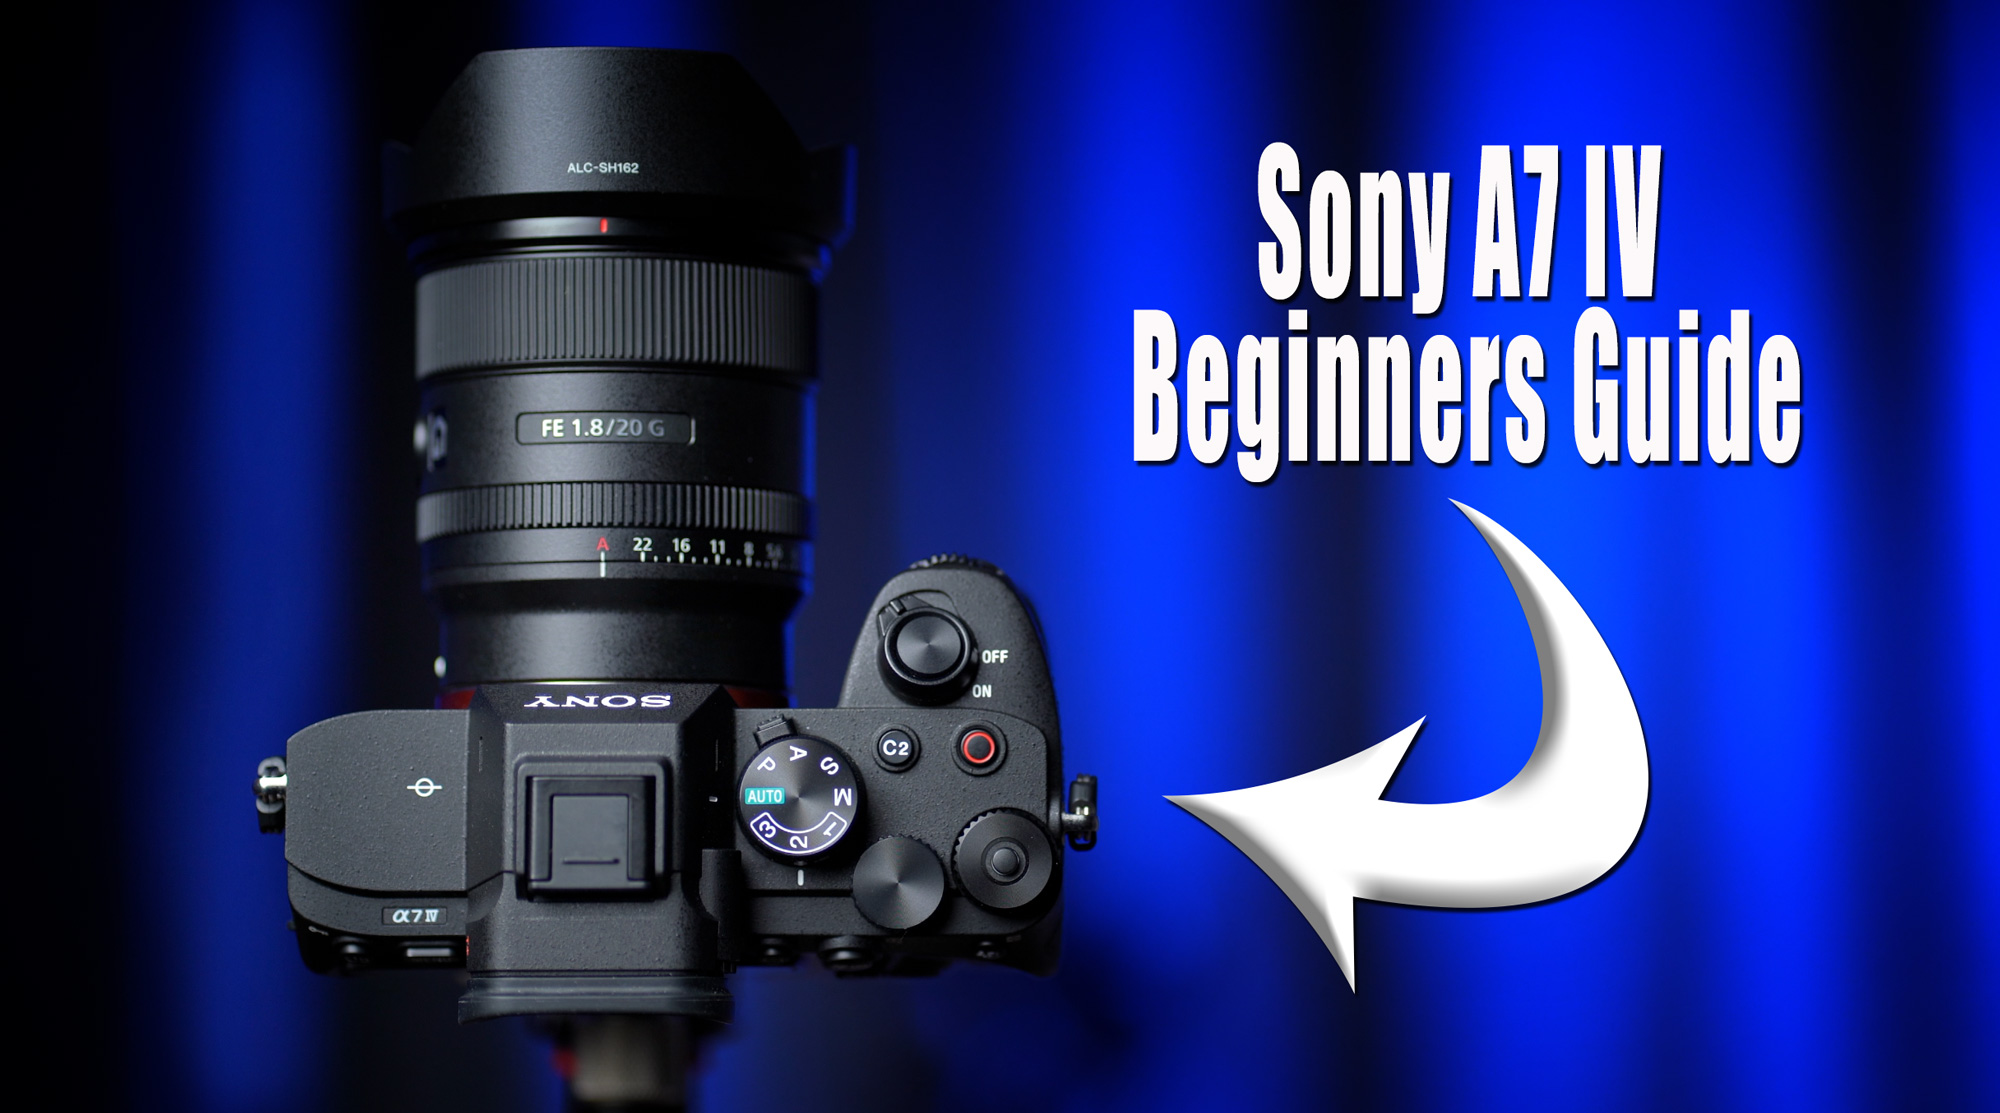 Sony A7 IV Beginners Guide